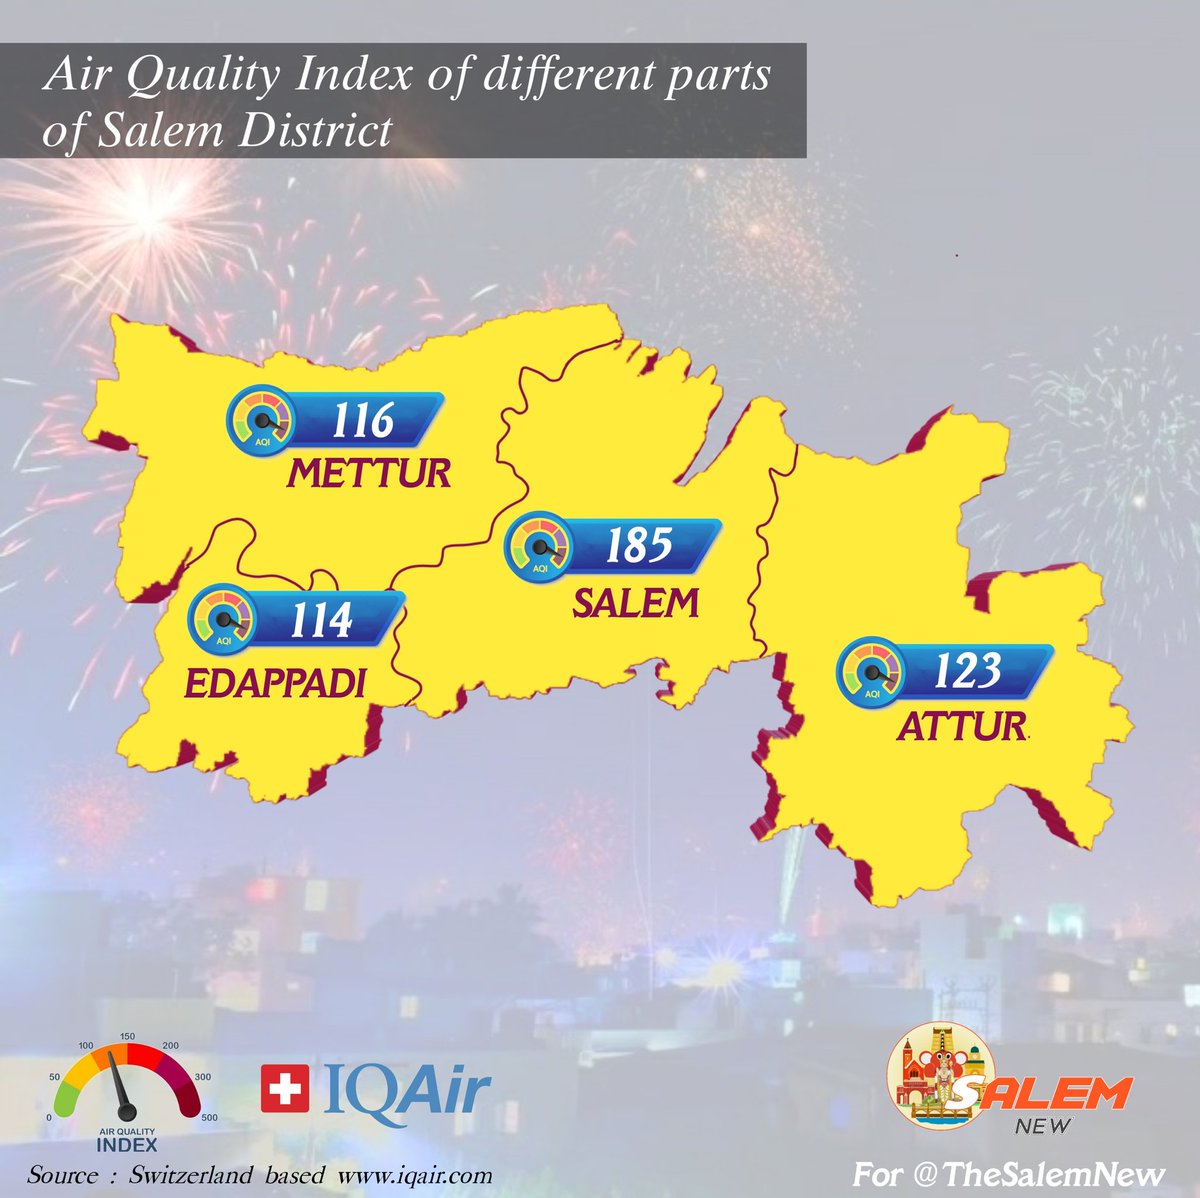 Air Quality Index of different parts of Salem District.

Salem - 185
Attur - 123
Mettur - 116
Edappadi - 114

All 4 cities remains moderate quality. #Salem is unhealthy remaining 3 are unhealthy for sensitive groups.

Source: iqair.com

#AirQualityIndex #Diwali🪔